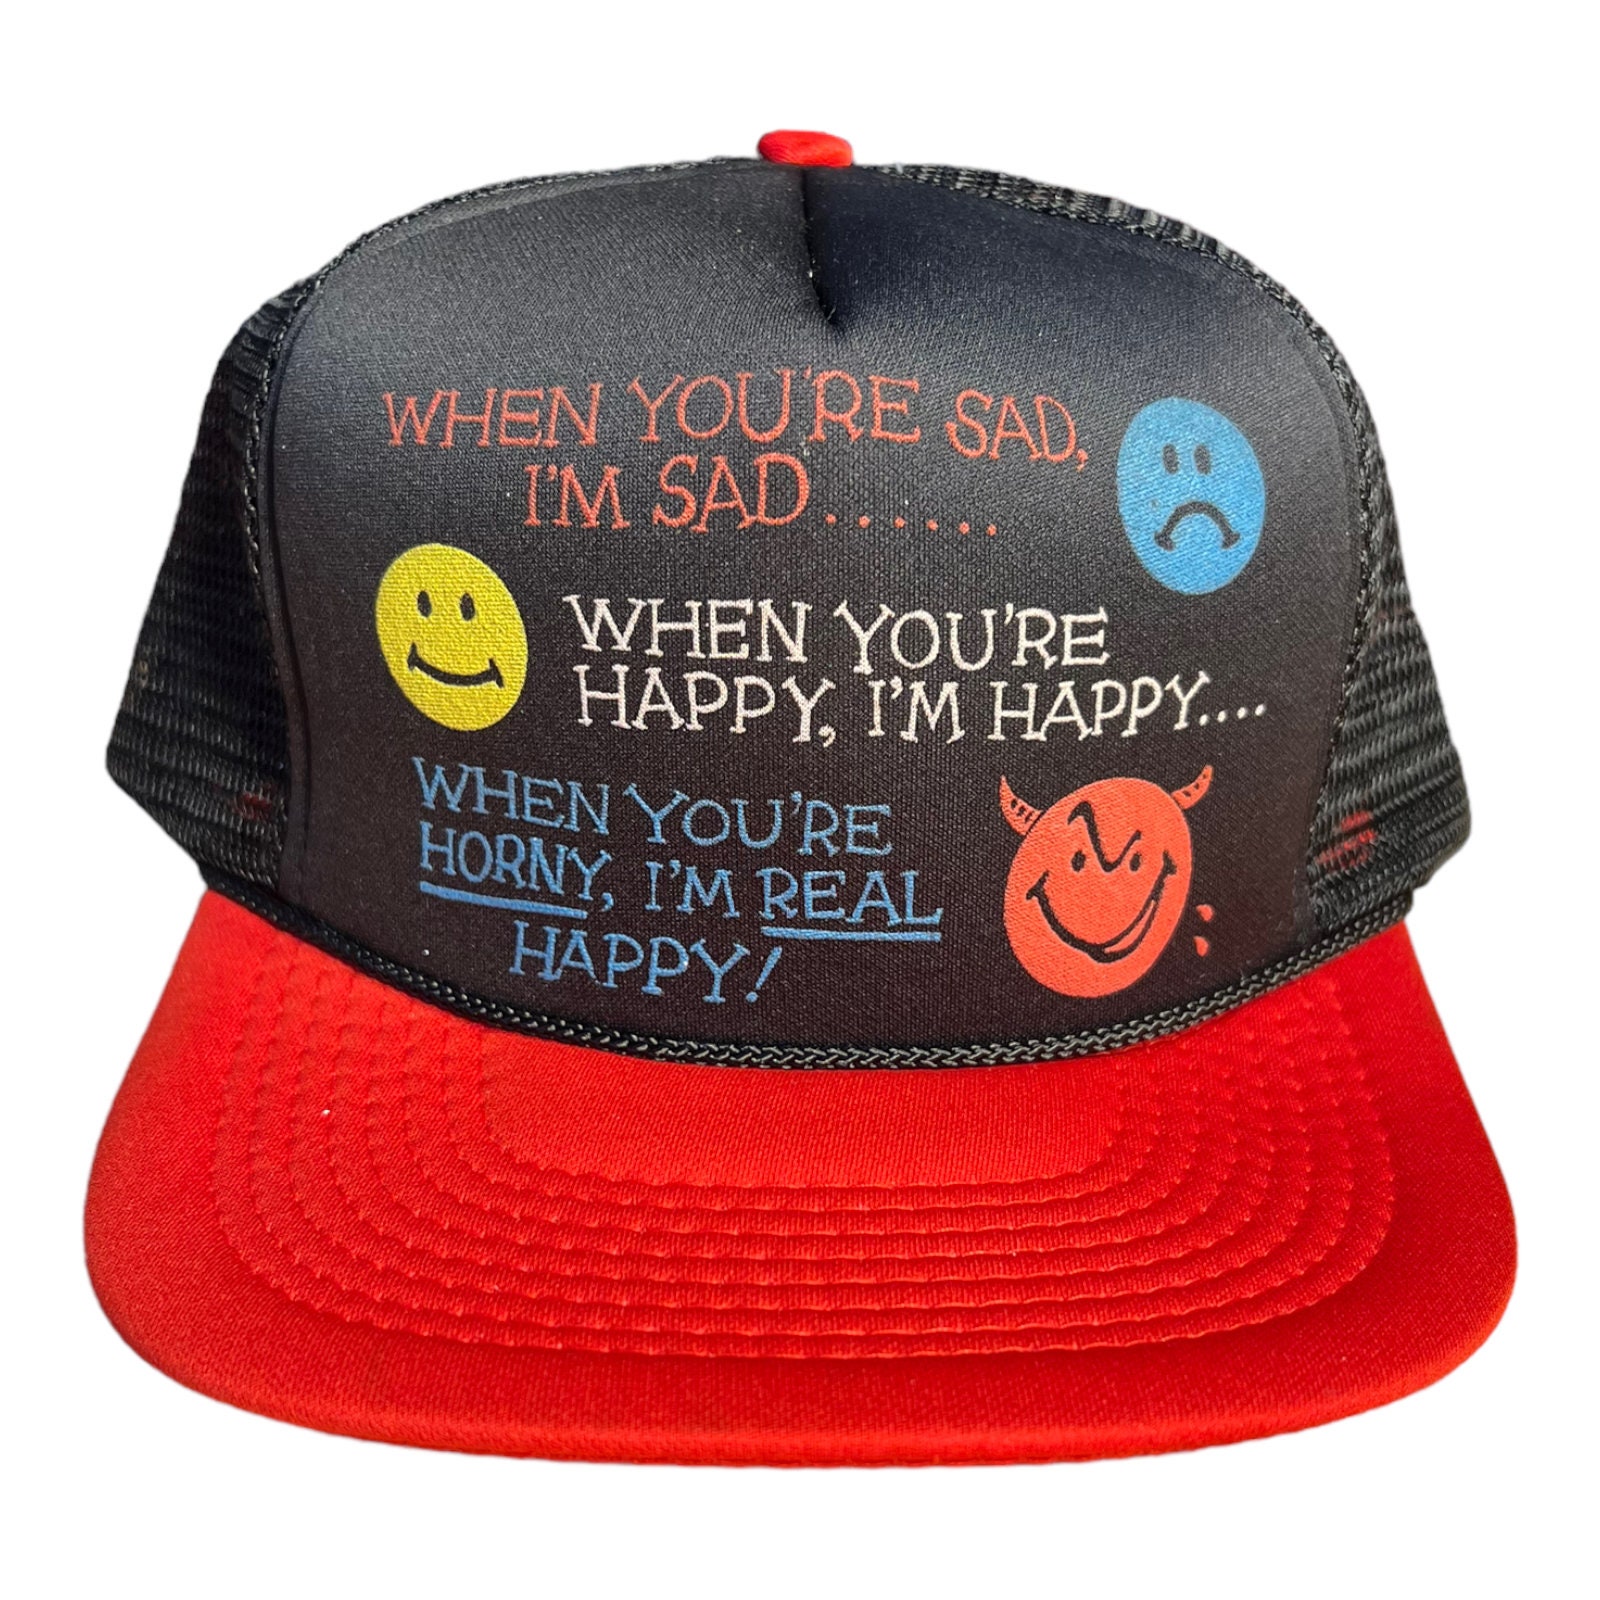 Vintage Trucker Hat // Funny When You're Horny Im Real Happy Cap // Two Tone  // Red Black Novelty Gag Gift Humor Cap // Adult Size Snapback -  Canada